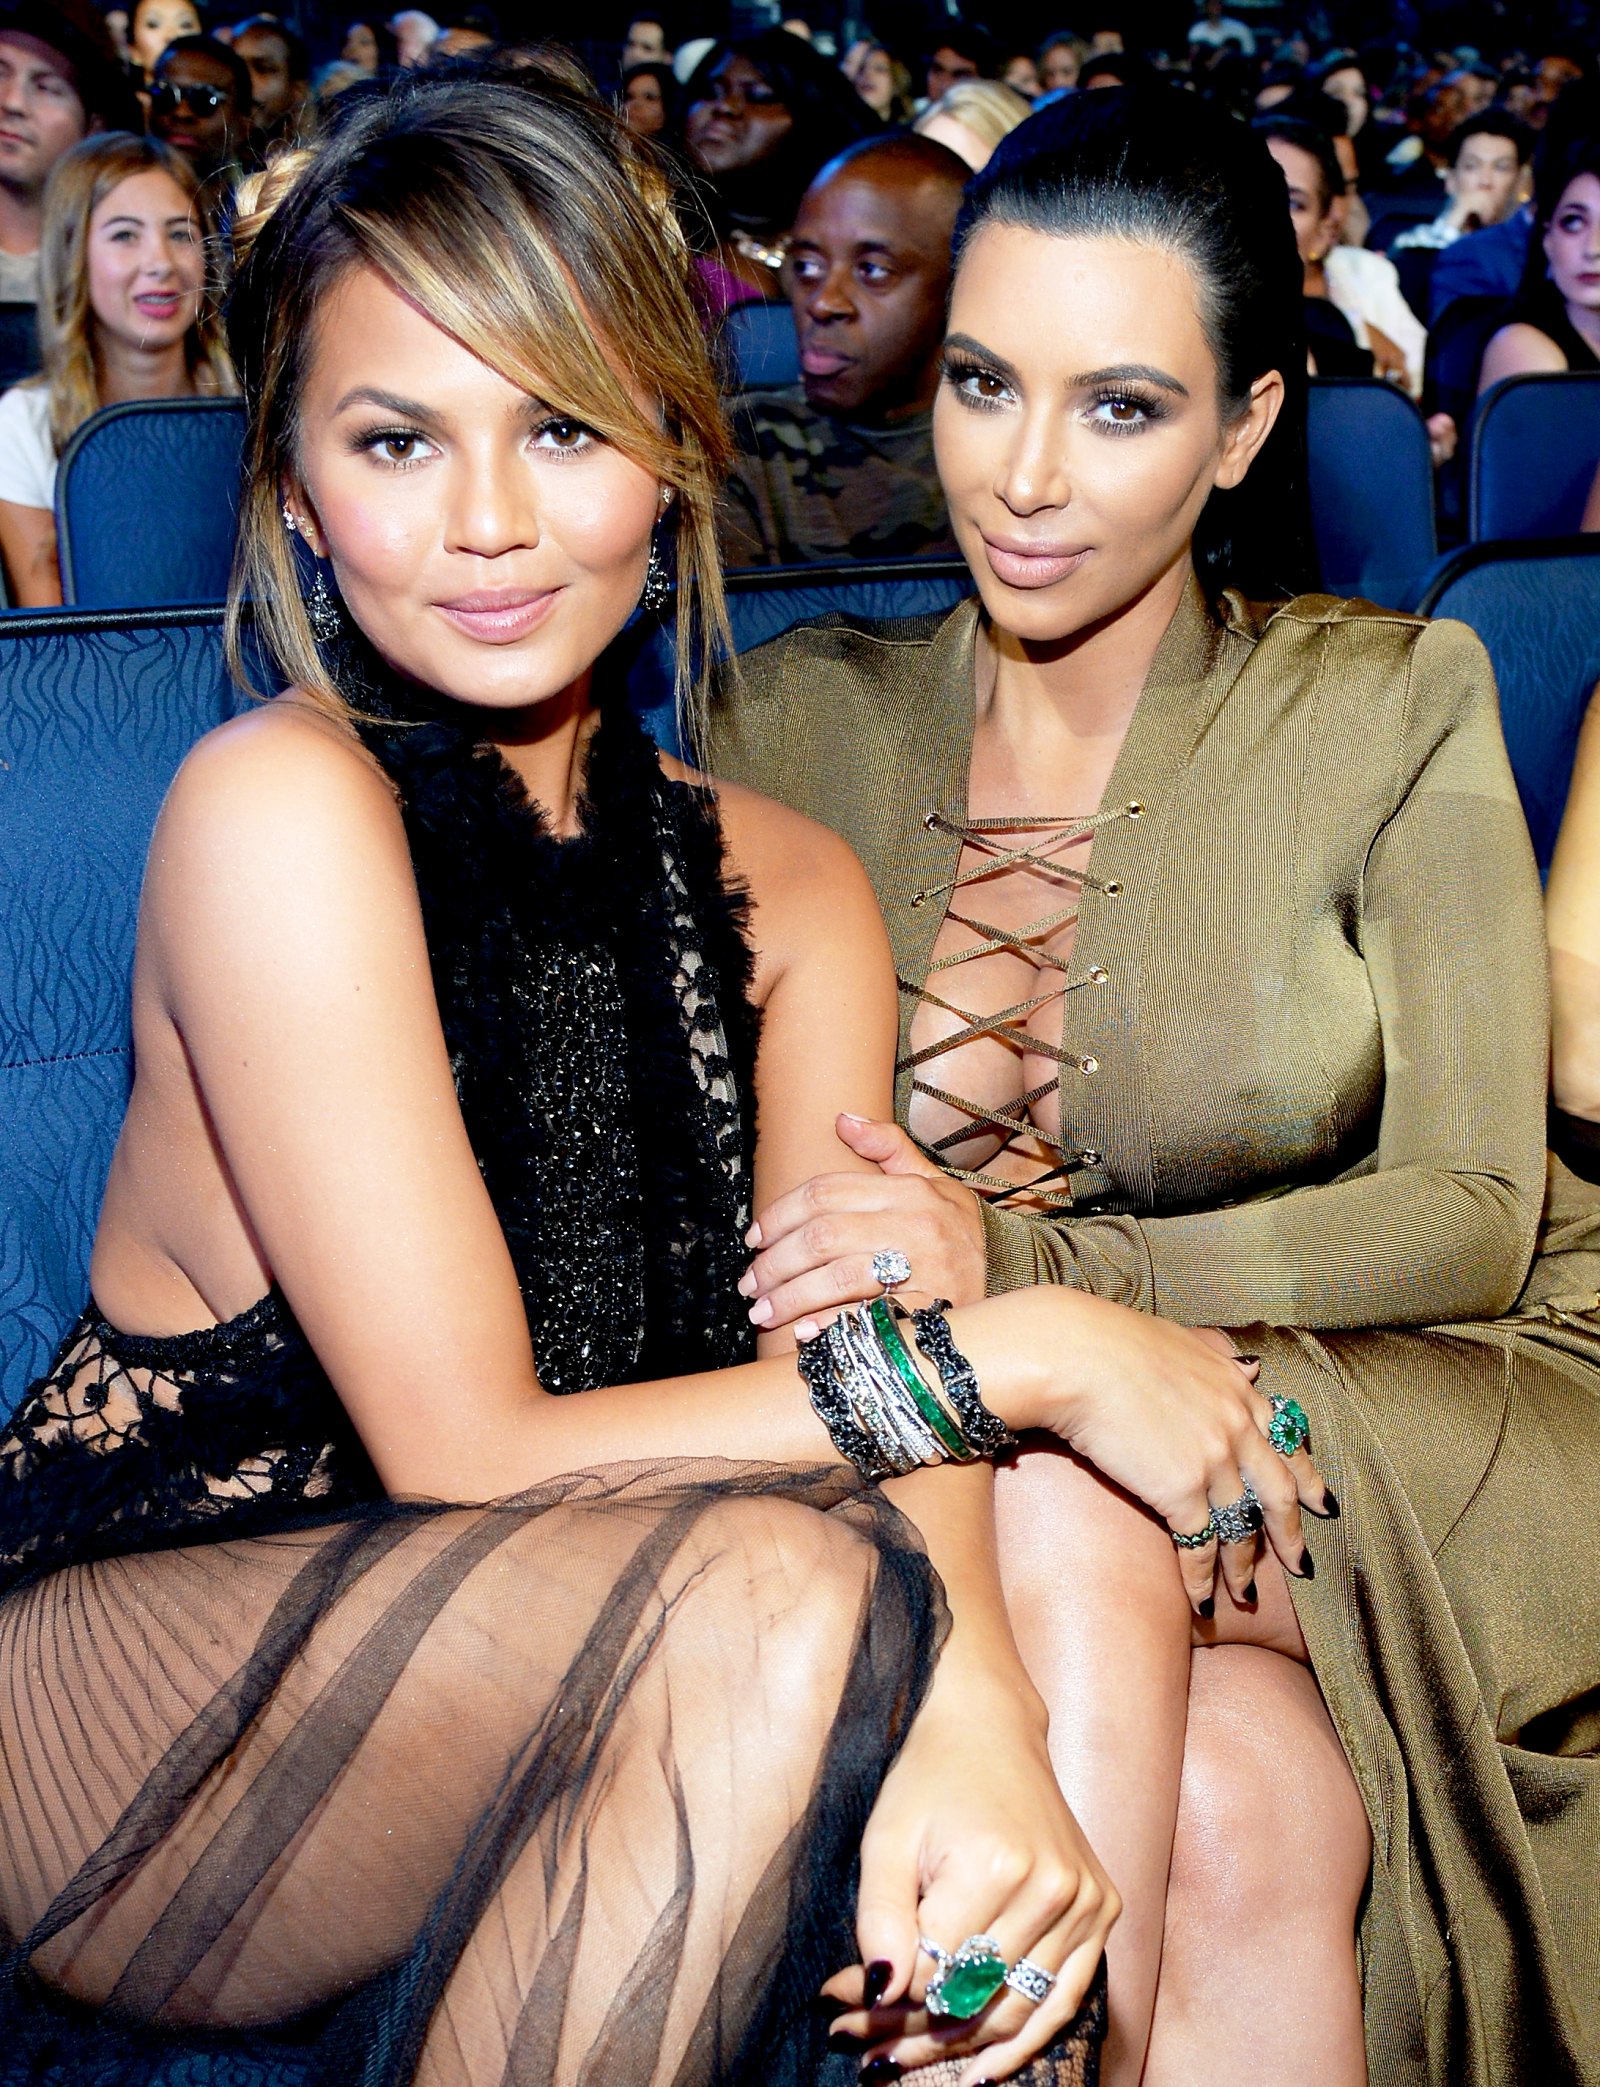 Chrissy Teigen and Kim Kardashian attend the 2015 MTV Video Music Awards at Microsoft Theater in Los Angeles, California.